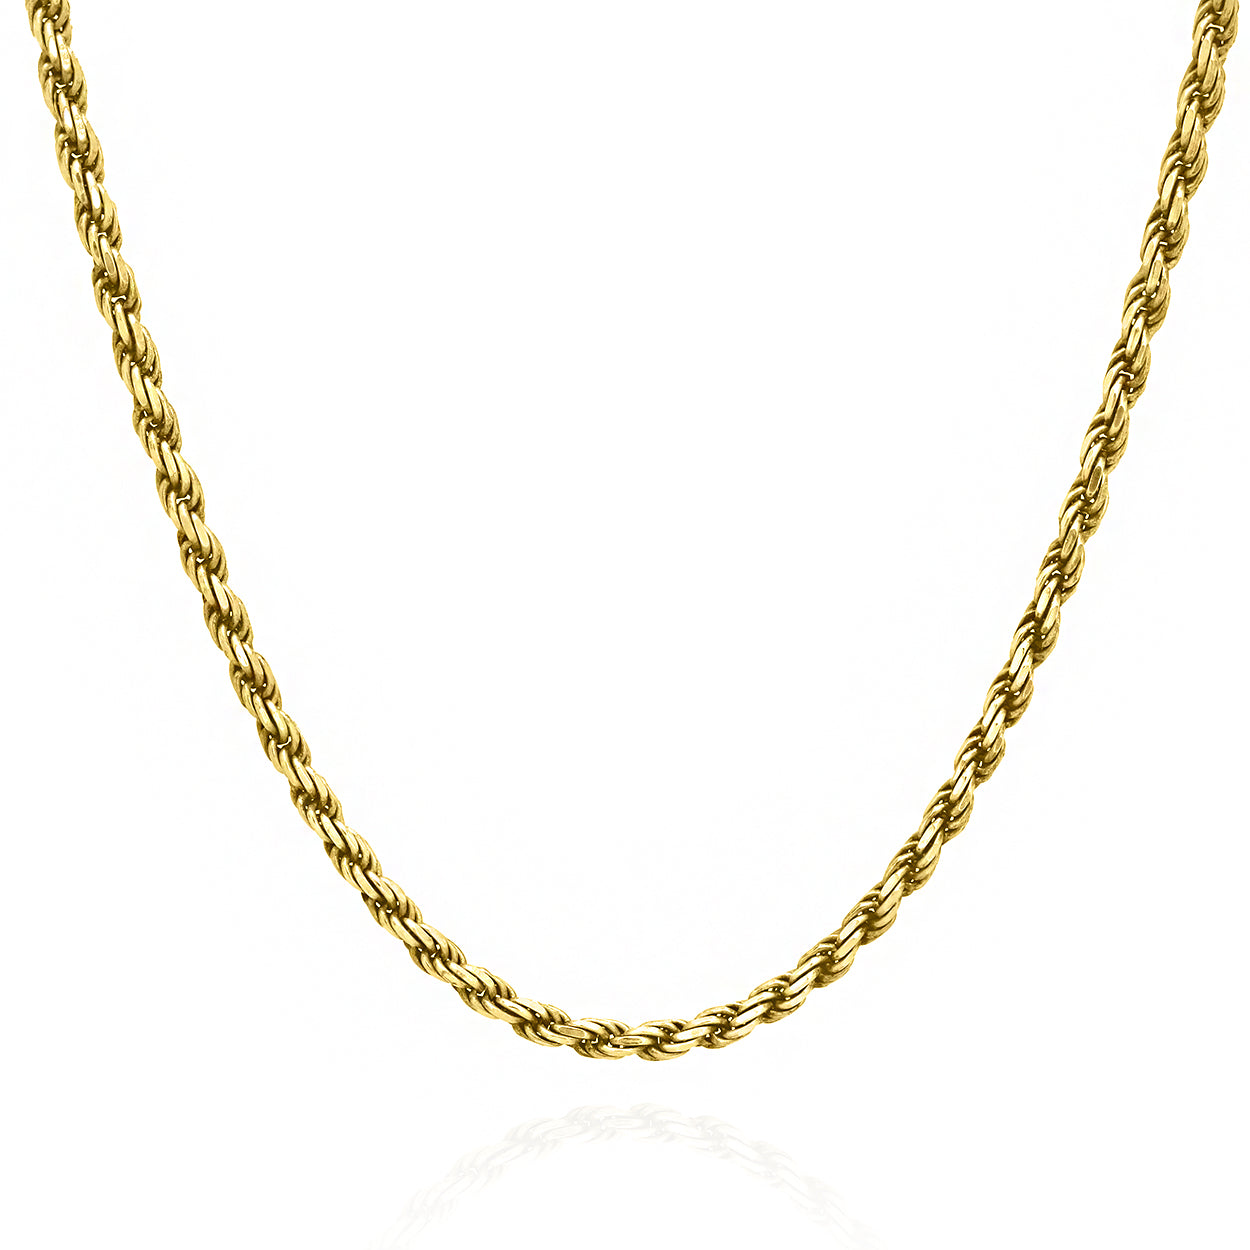 3mm Wide Rope Style Chain Solid Gold Yellow